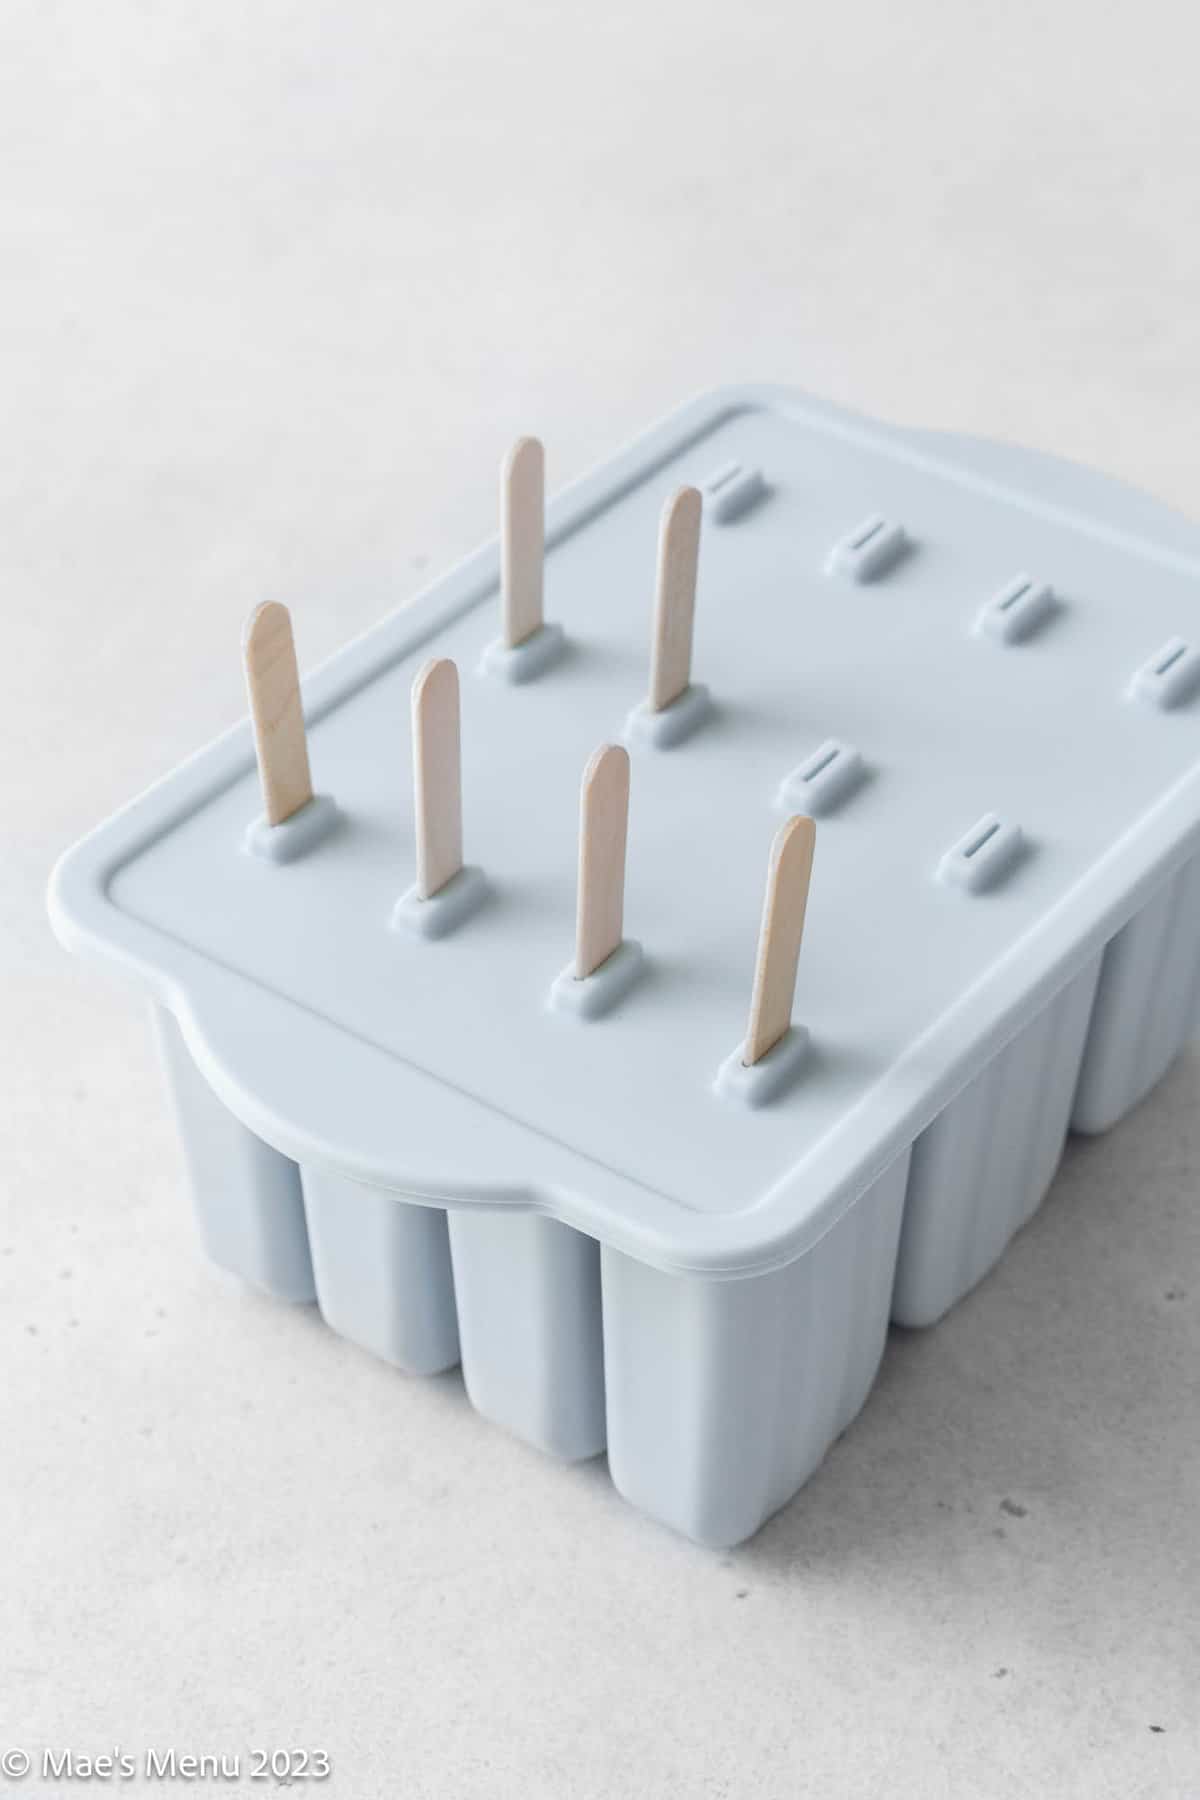 A popsicle mold with sticks in it.